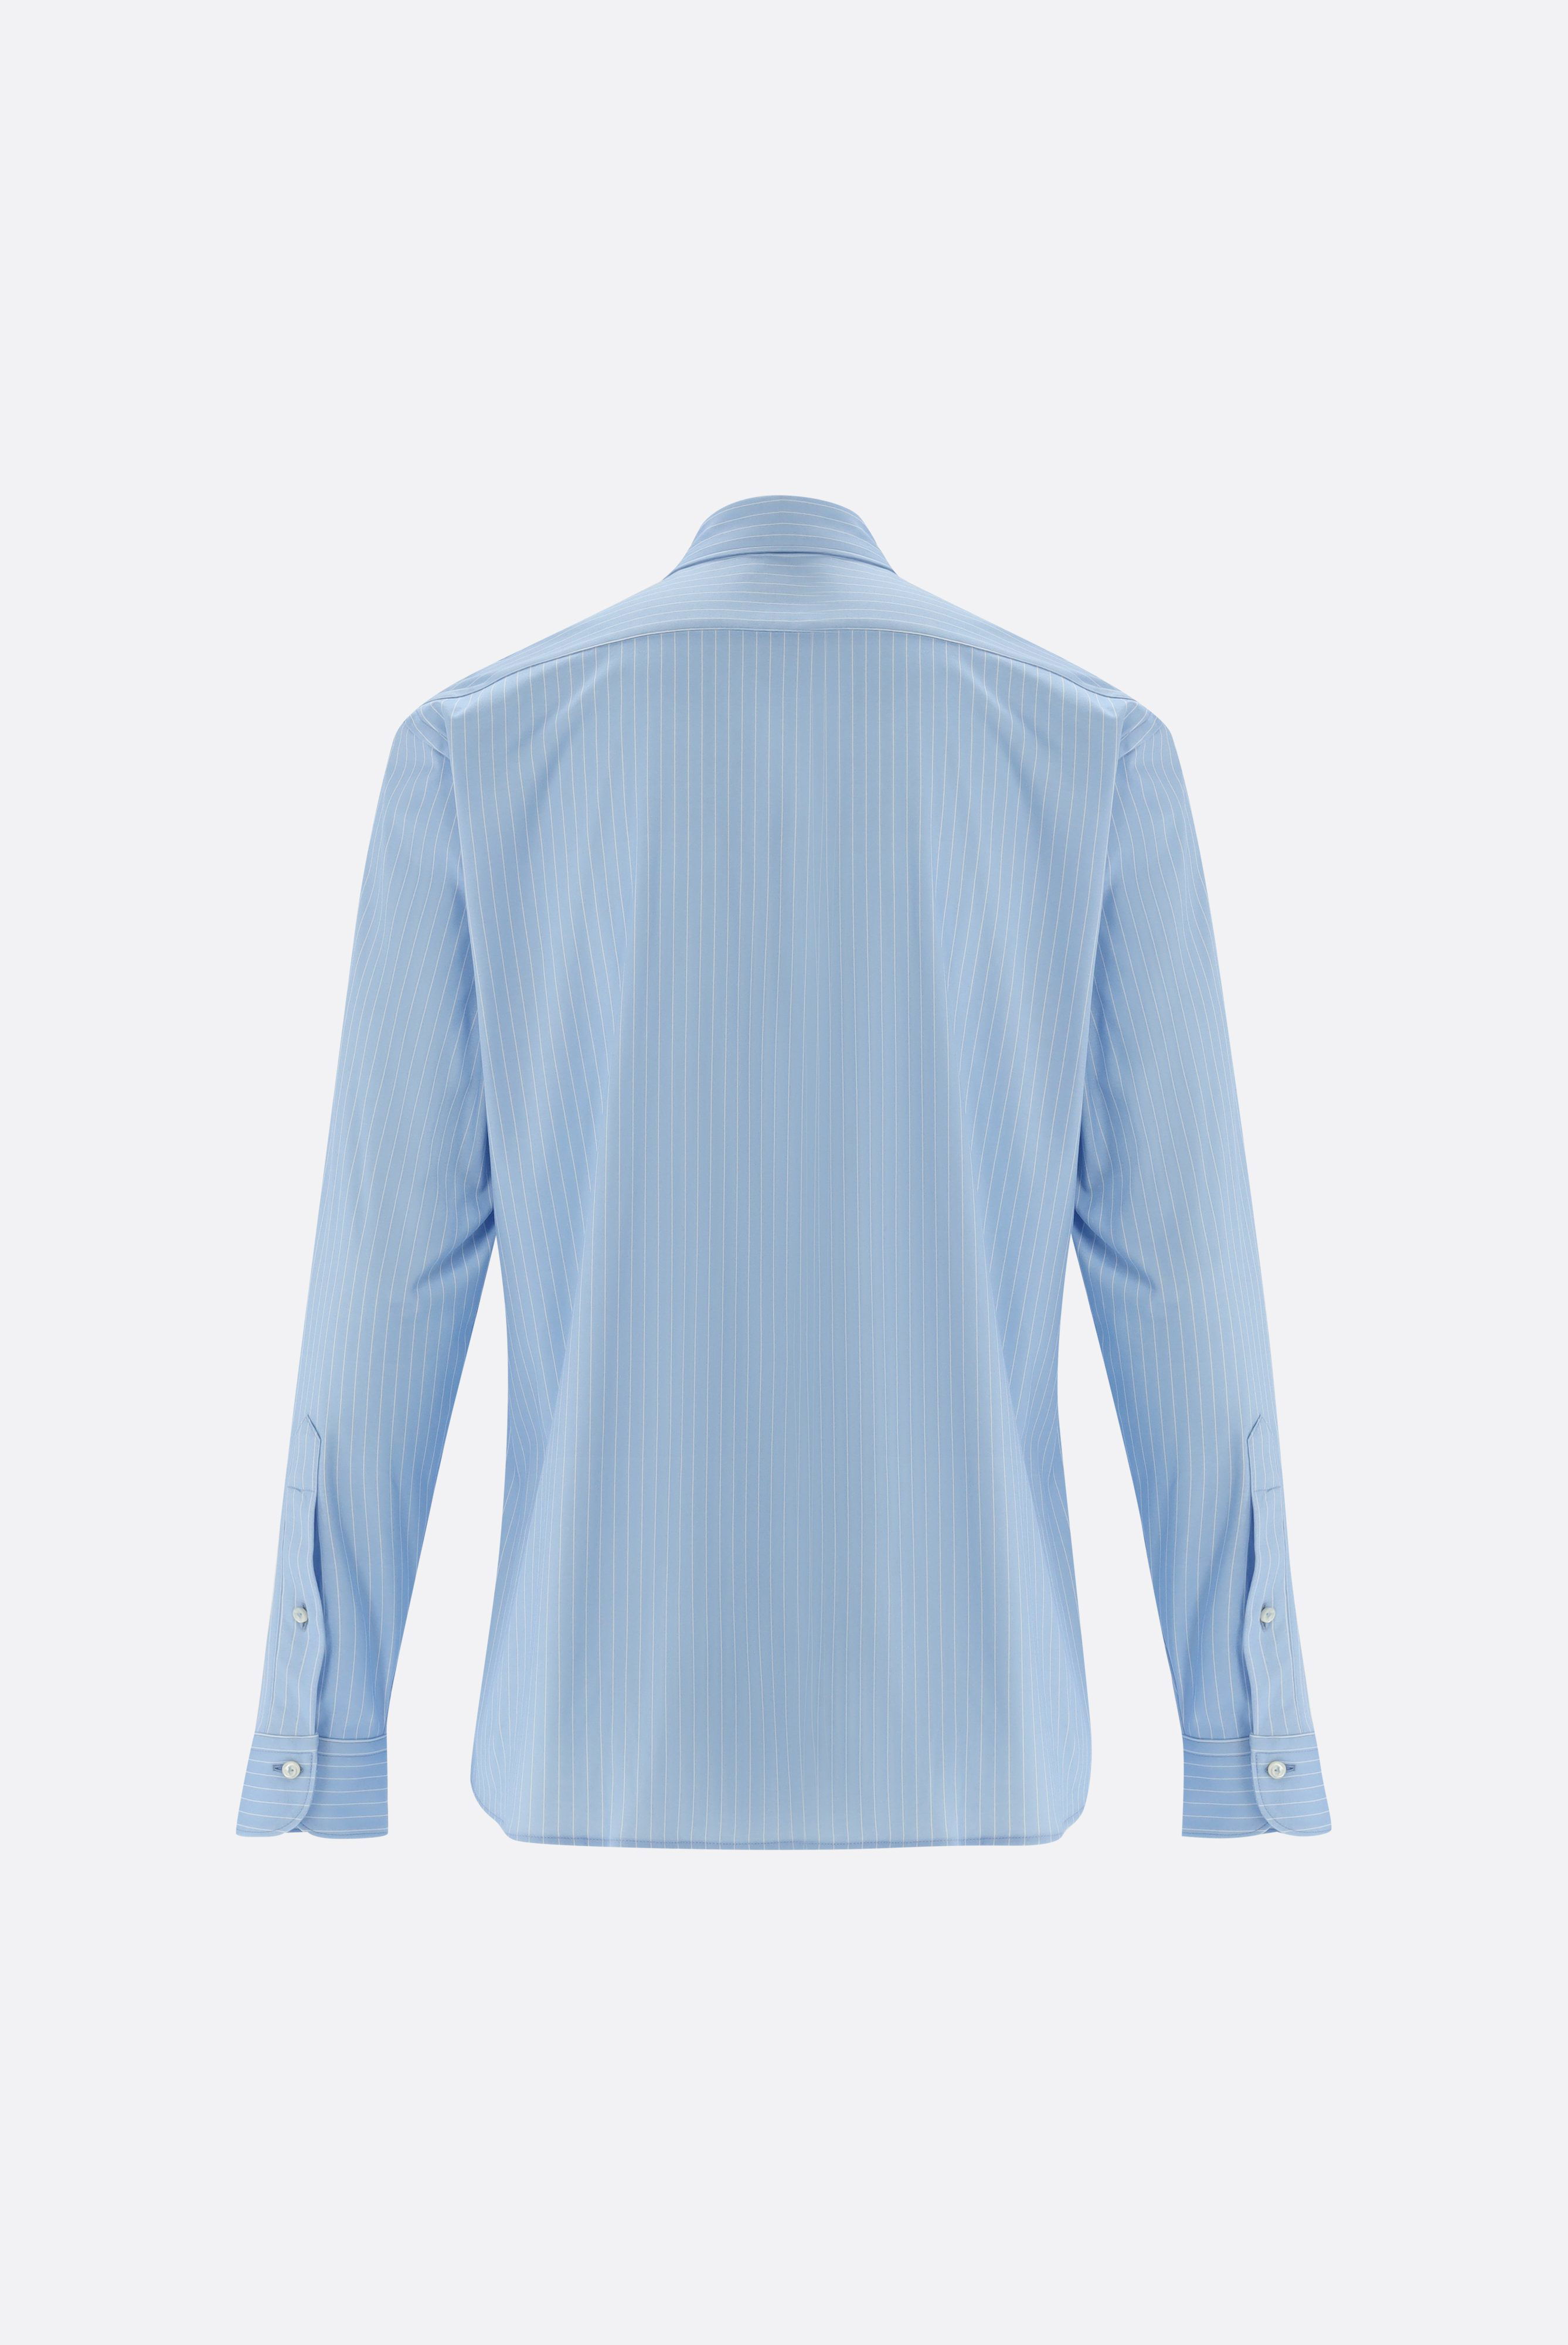 Jersey shirt made of Swiss cotton with structure